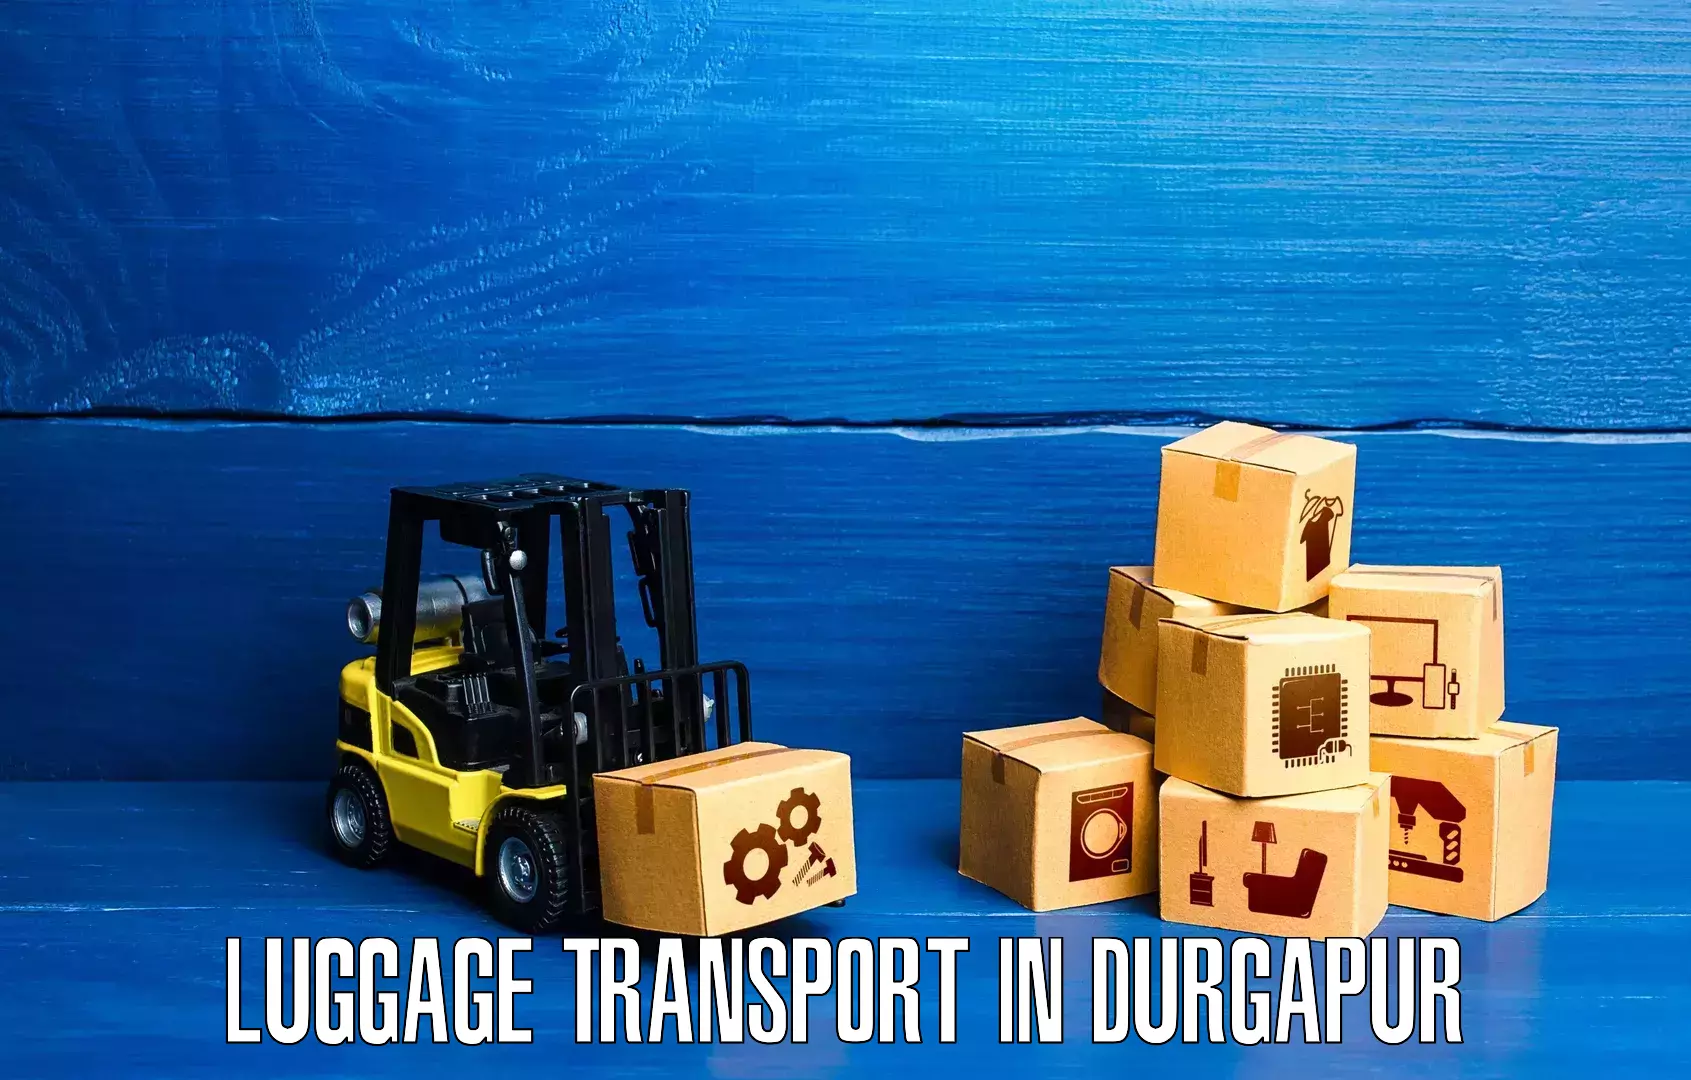 Personal luggage delivery in Durgapur